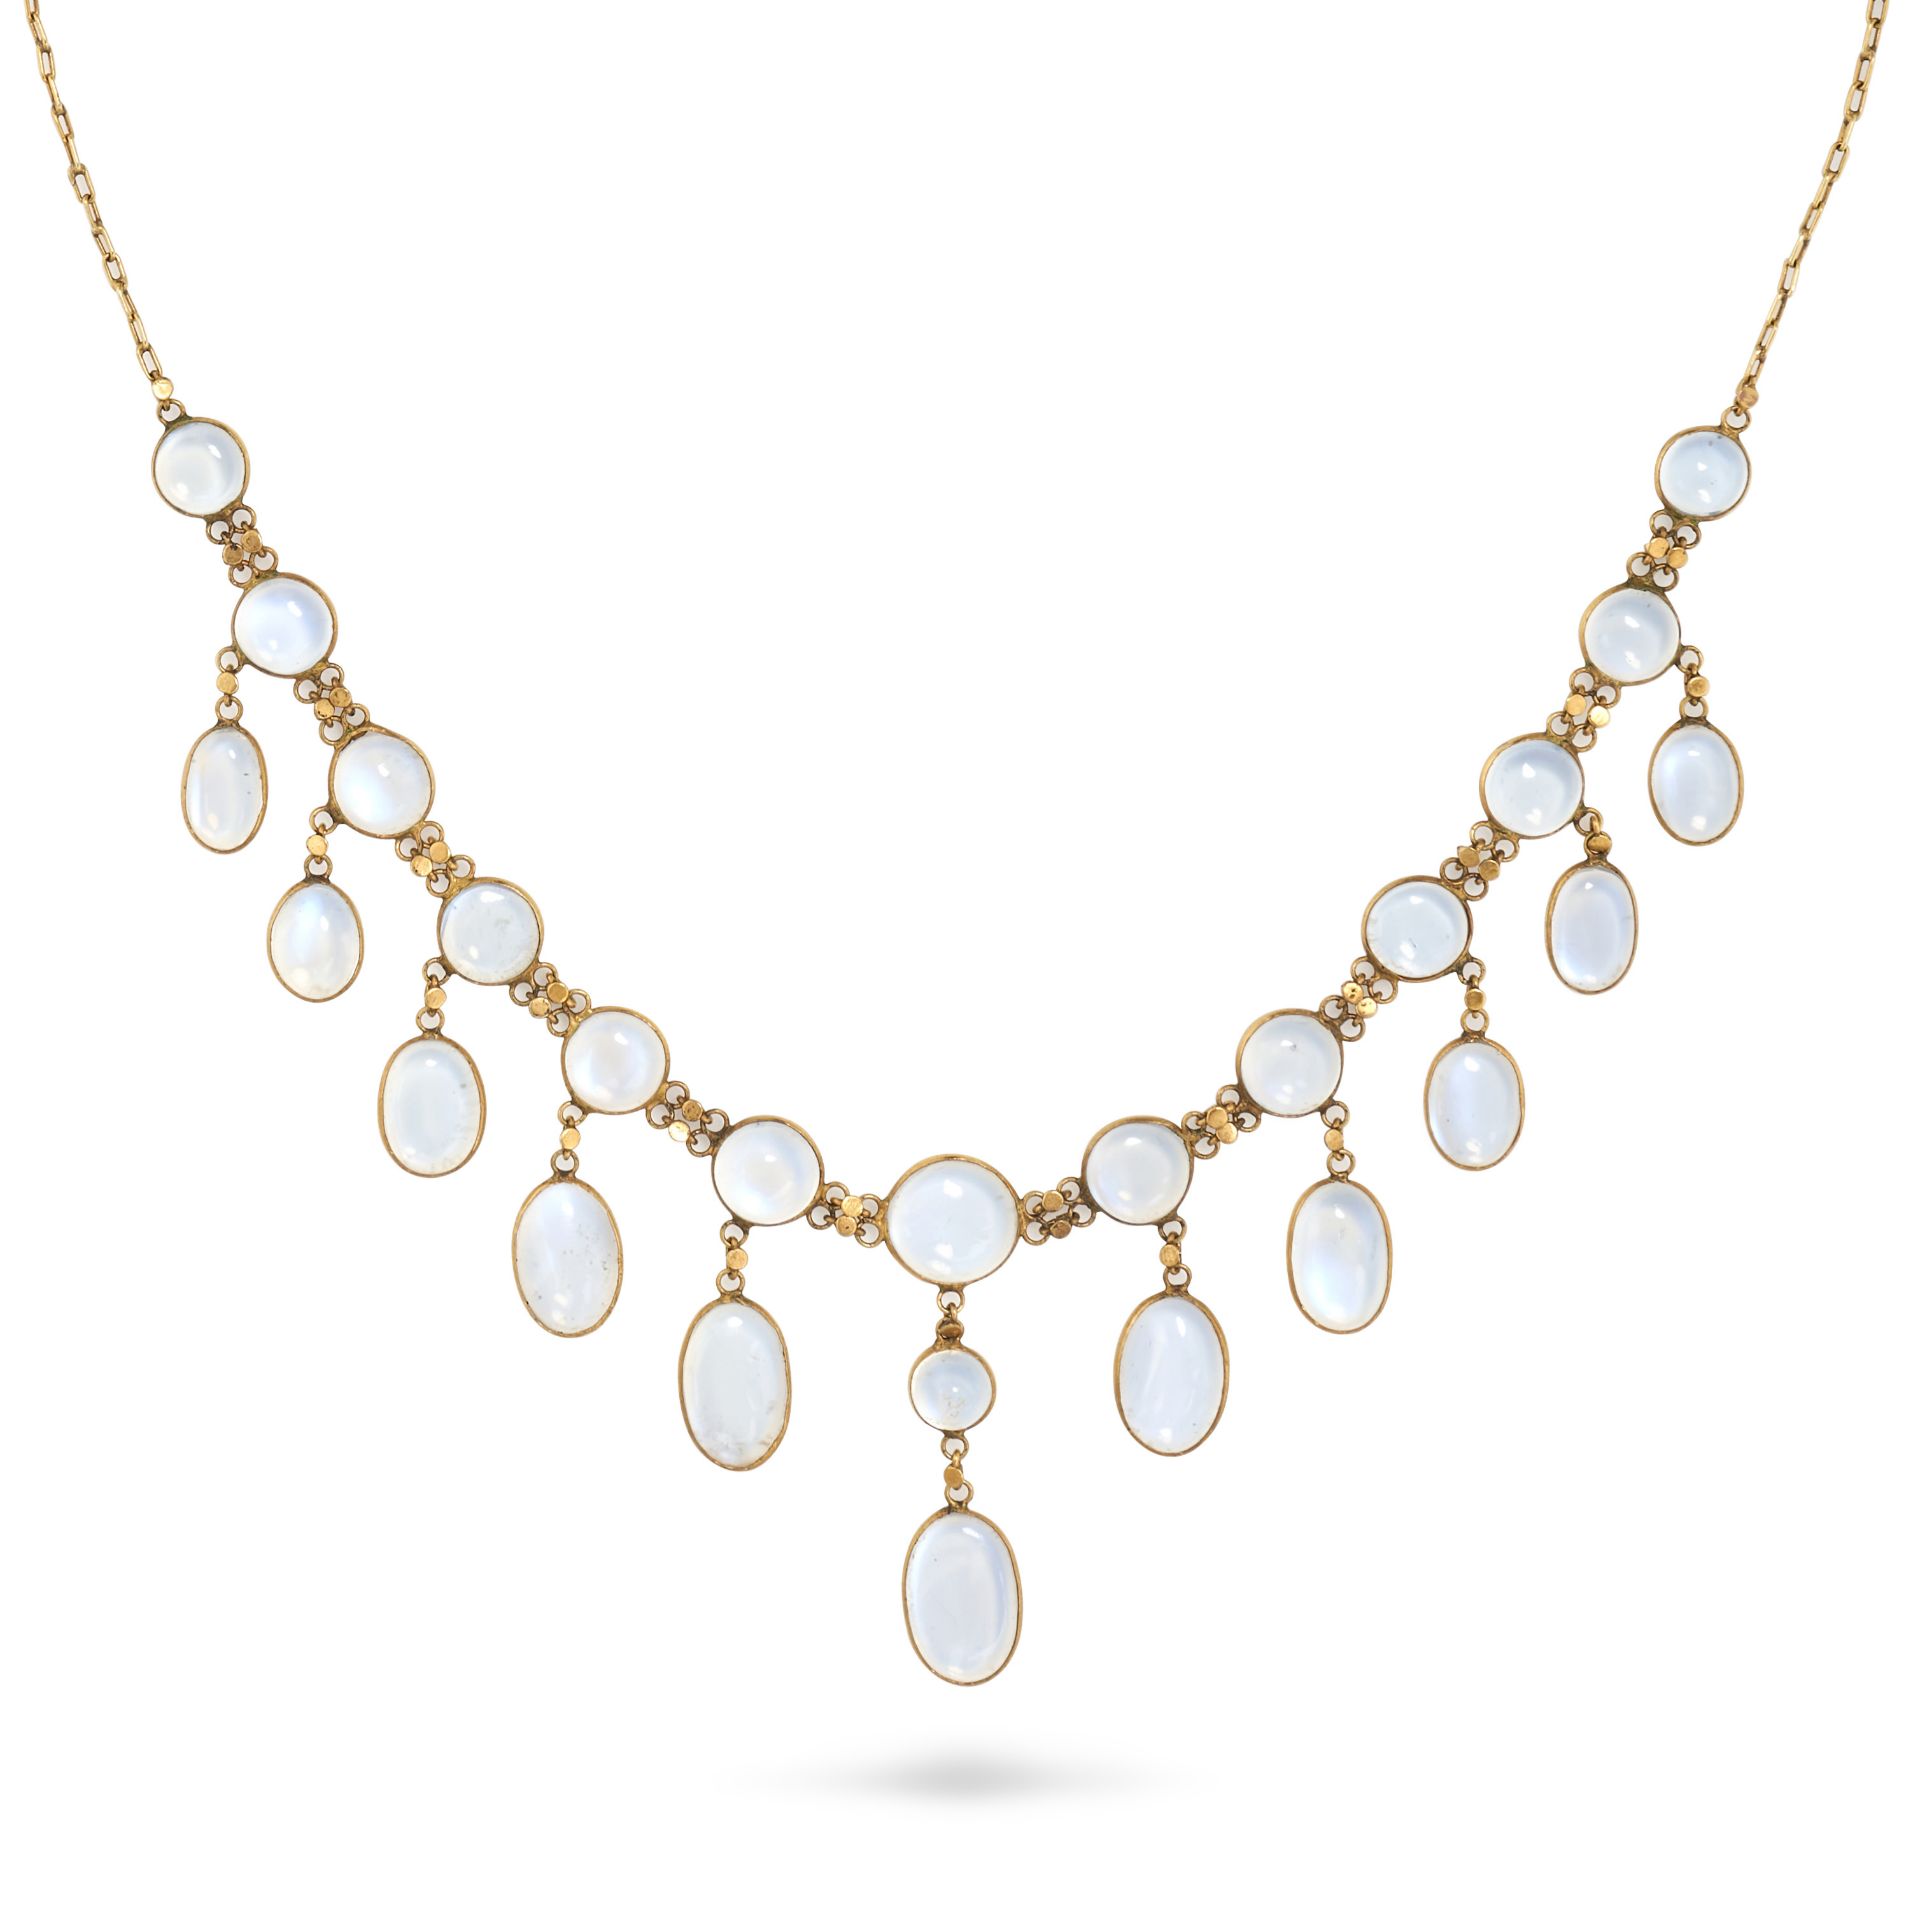 AN ANTIQUE MOONSTONE FRINGE NECKLACE in yellow gold, set with a row of round cabochon moonstones ...